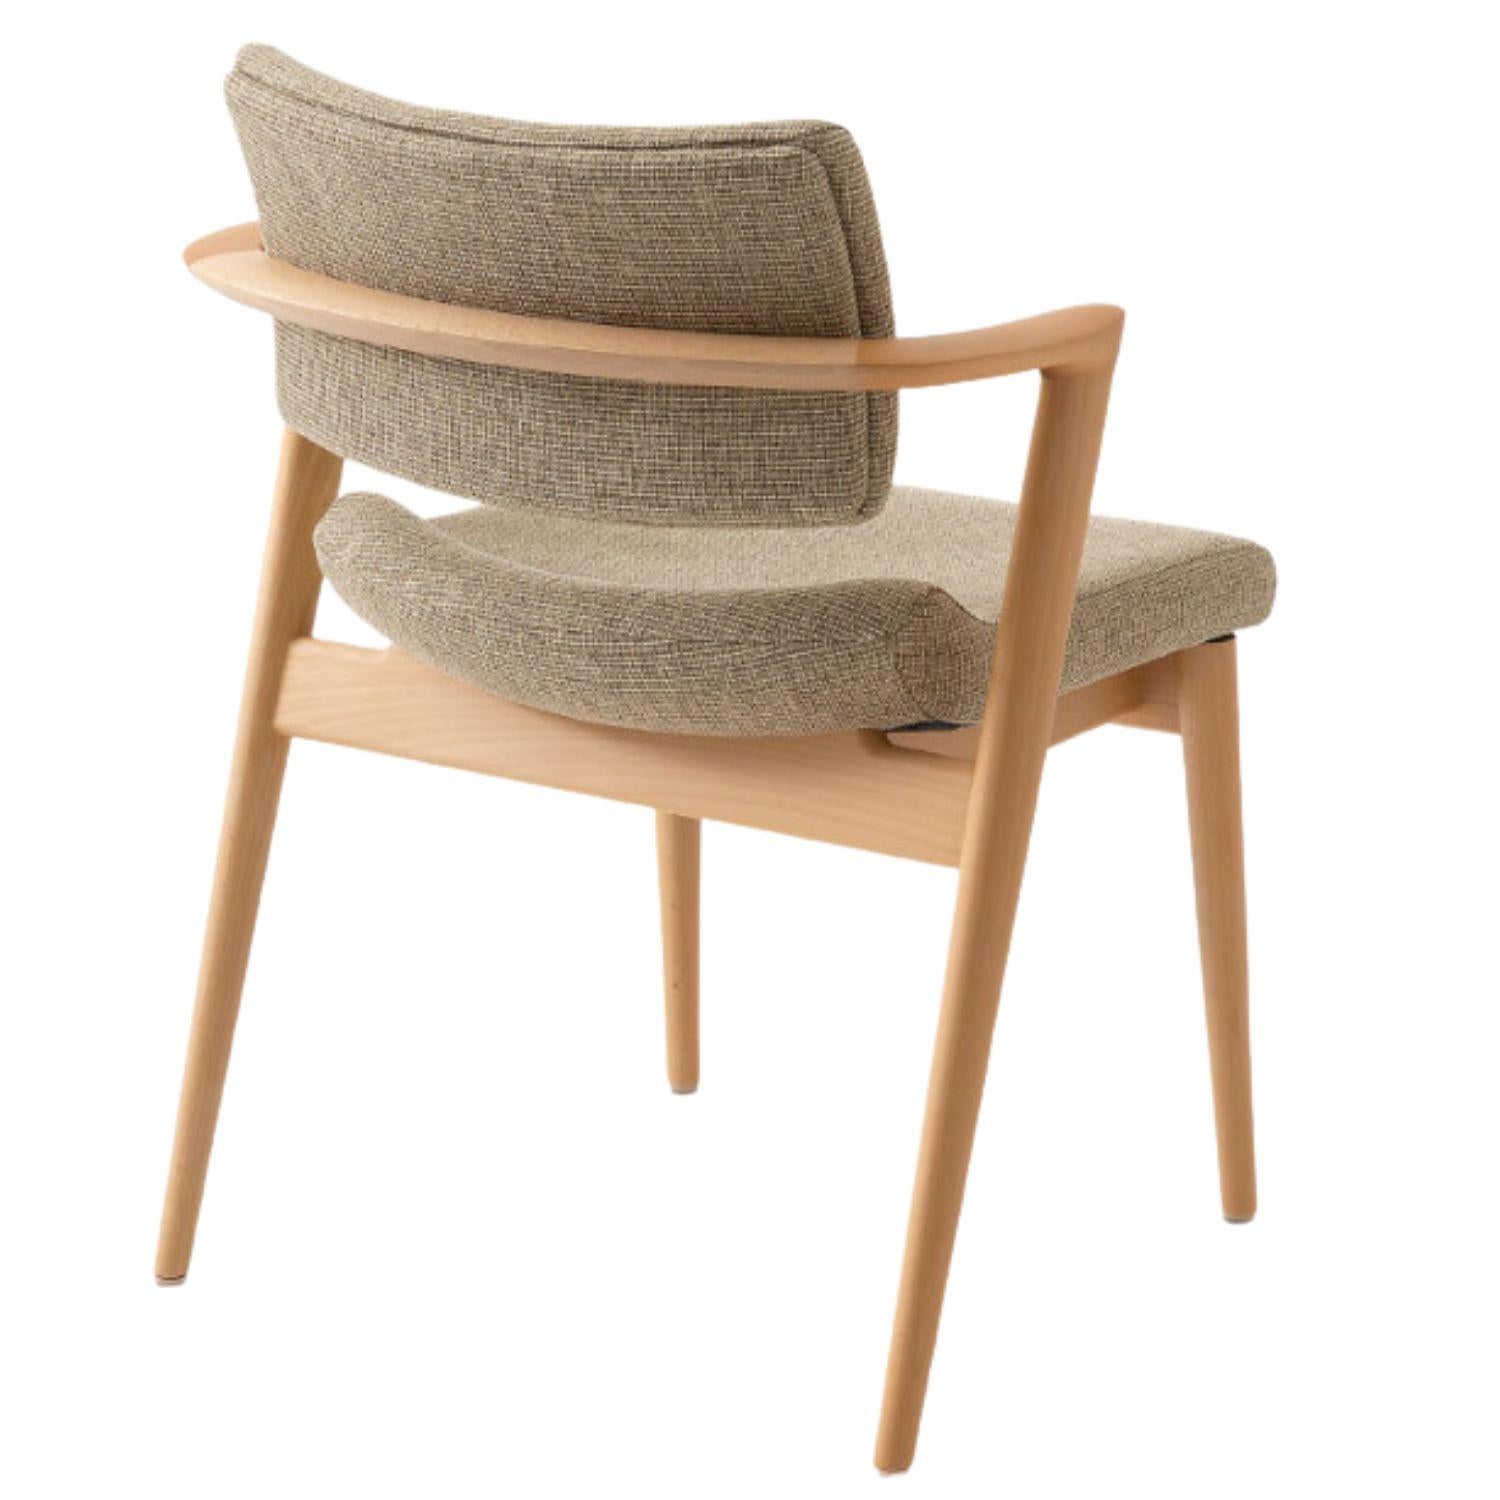 Motomi Kawakami 'Seoto-Ex KX250' semi-arm chair in beech & upholstery for Hida.

For centuries, famed Hida artisans in Gifu prefecture have played a role in Japan's woodworking culture, crafting iconic bentwood furniture from sustainable local